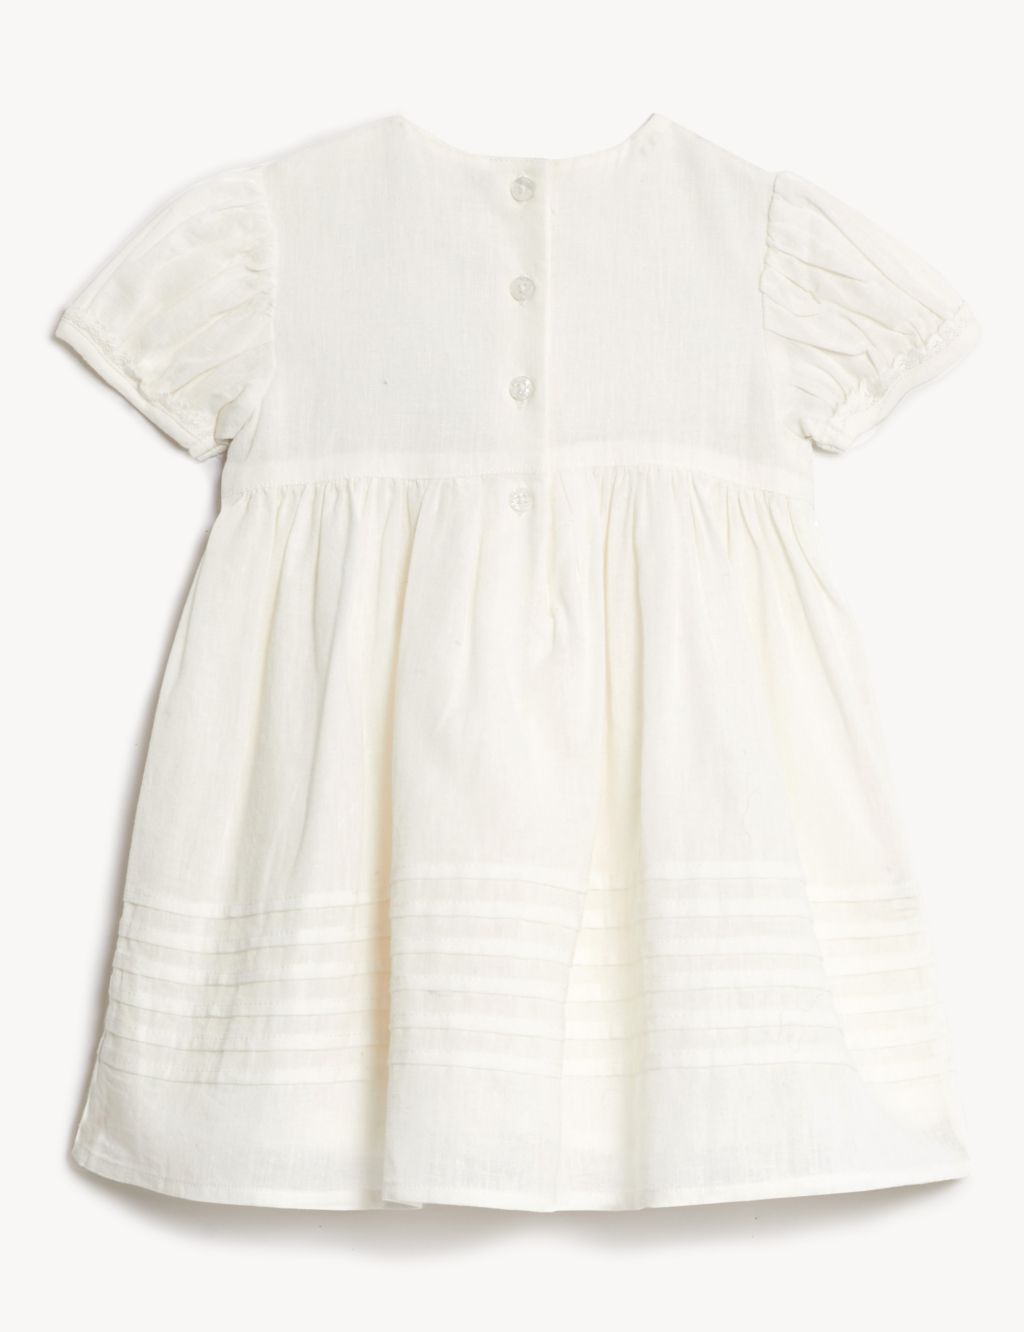 Cotton Rich Embroidered Dress (0 - 3 Yrs) image 2